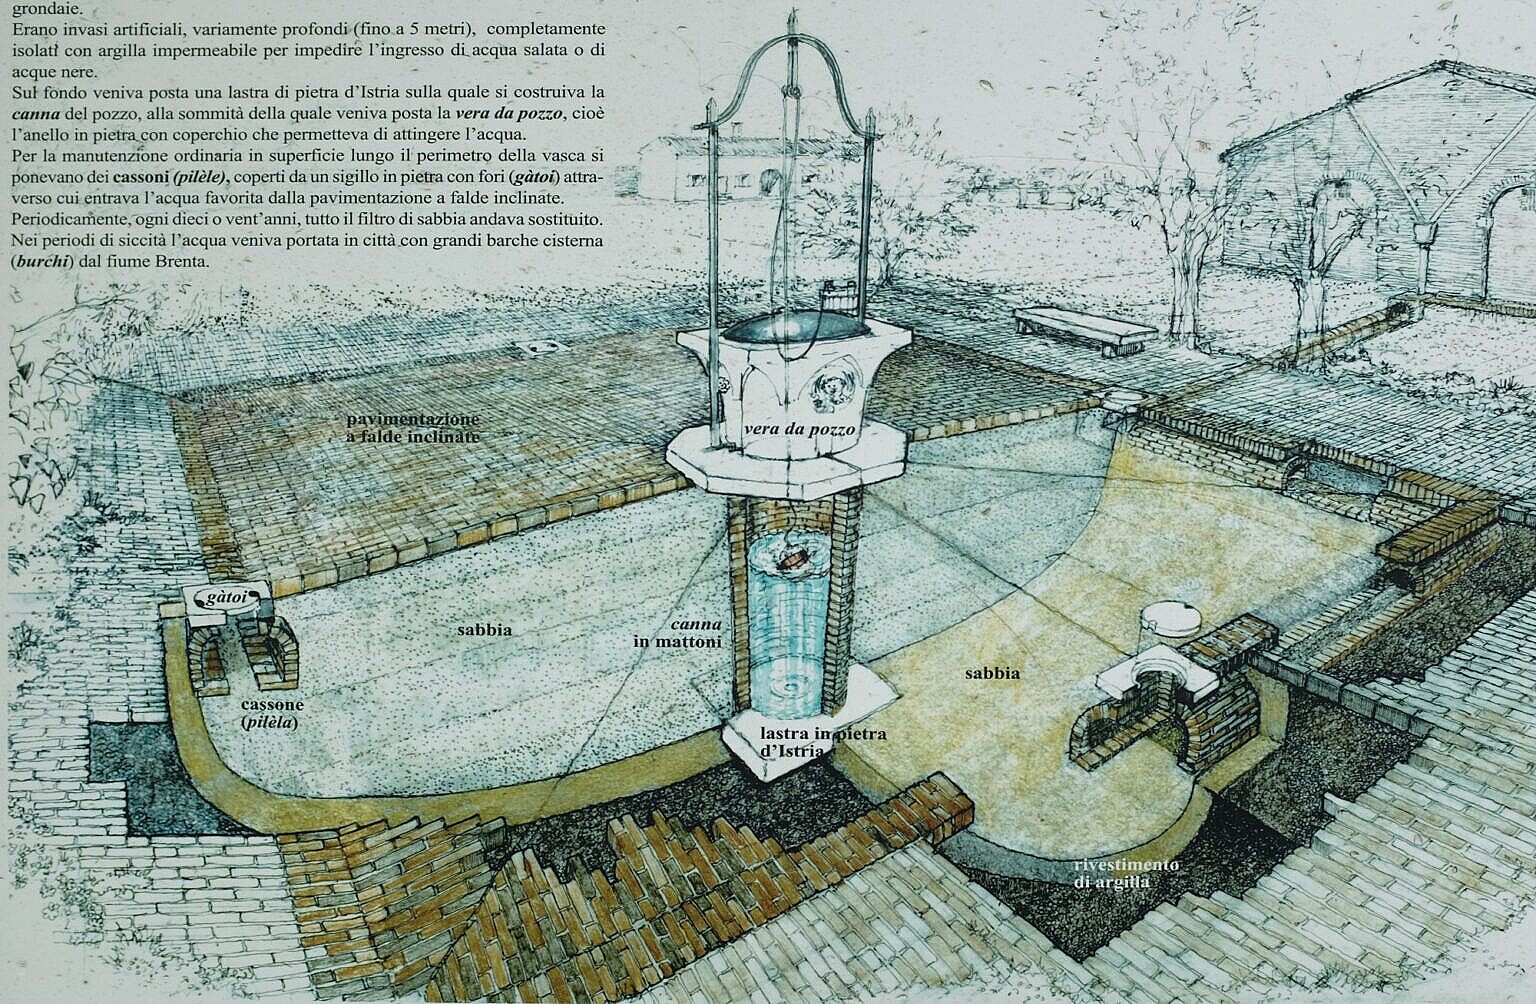 Illustration of the structure of a Venetian well for collecting rainwater (from the Lazzaretto Nuovo)